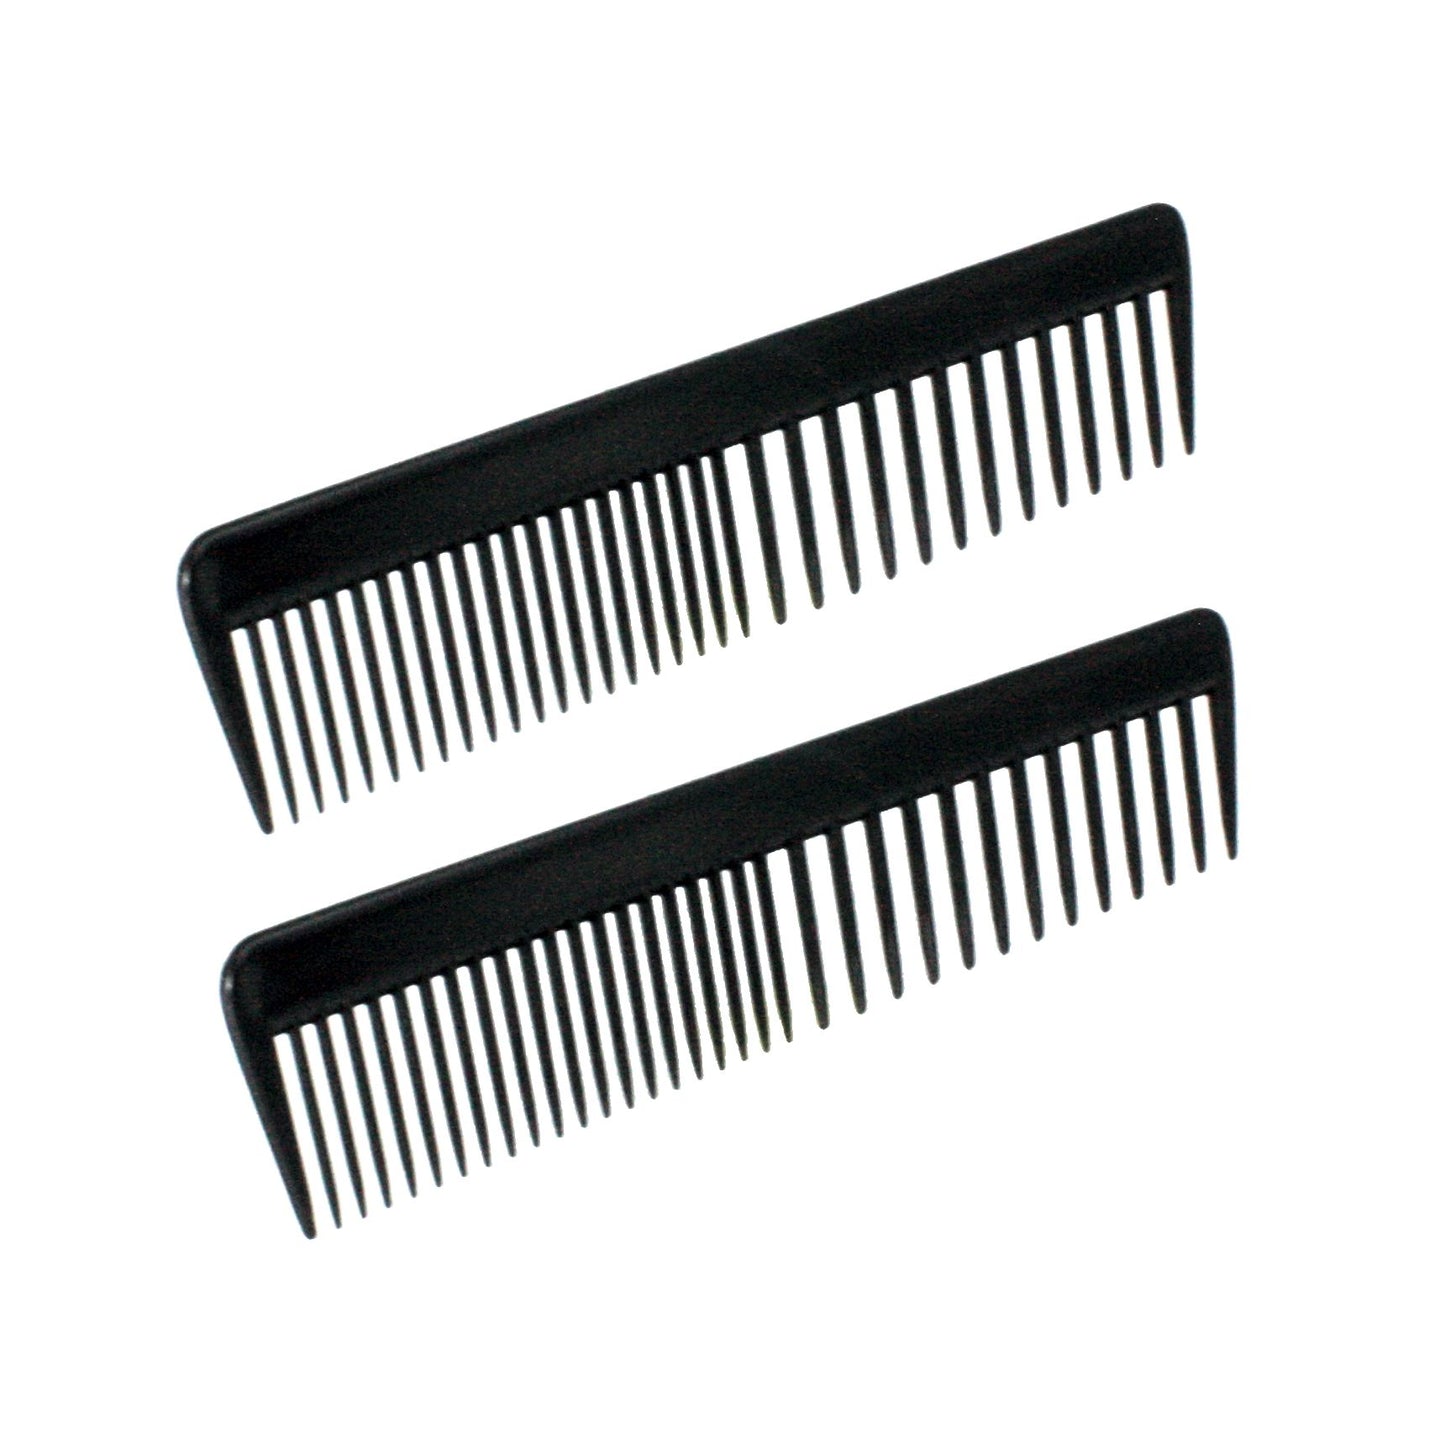 Amelia Beauty, 7in Black Plastic Wide Tooth Comb, Made in USA, Professional Grade Pocket Hair Comb, Wet, Tangled Hair, Portable Salon Barber Shop Everyday Styling Cutting Hair Styling Tool, 2 Pack